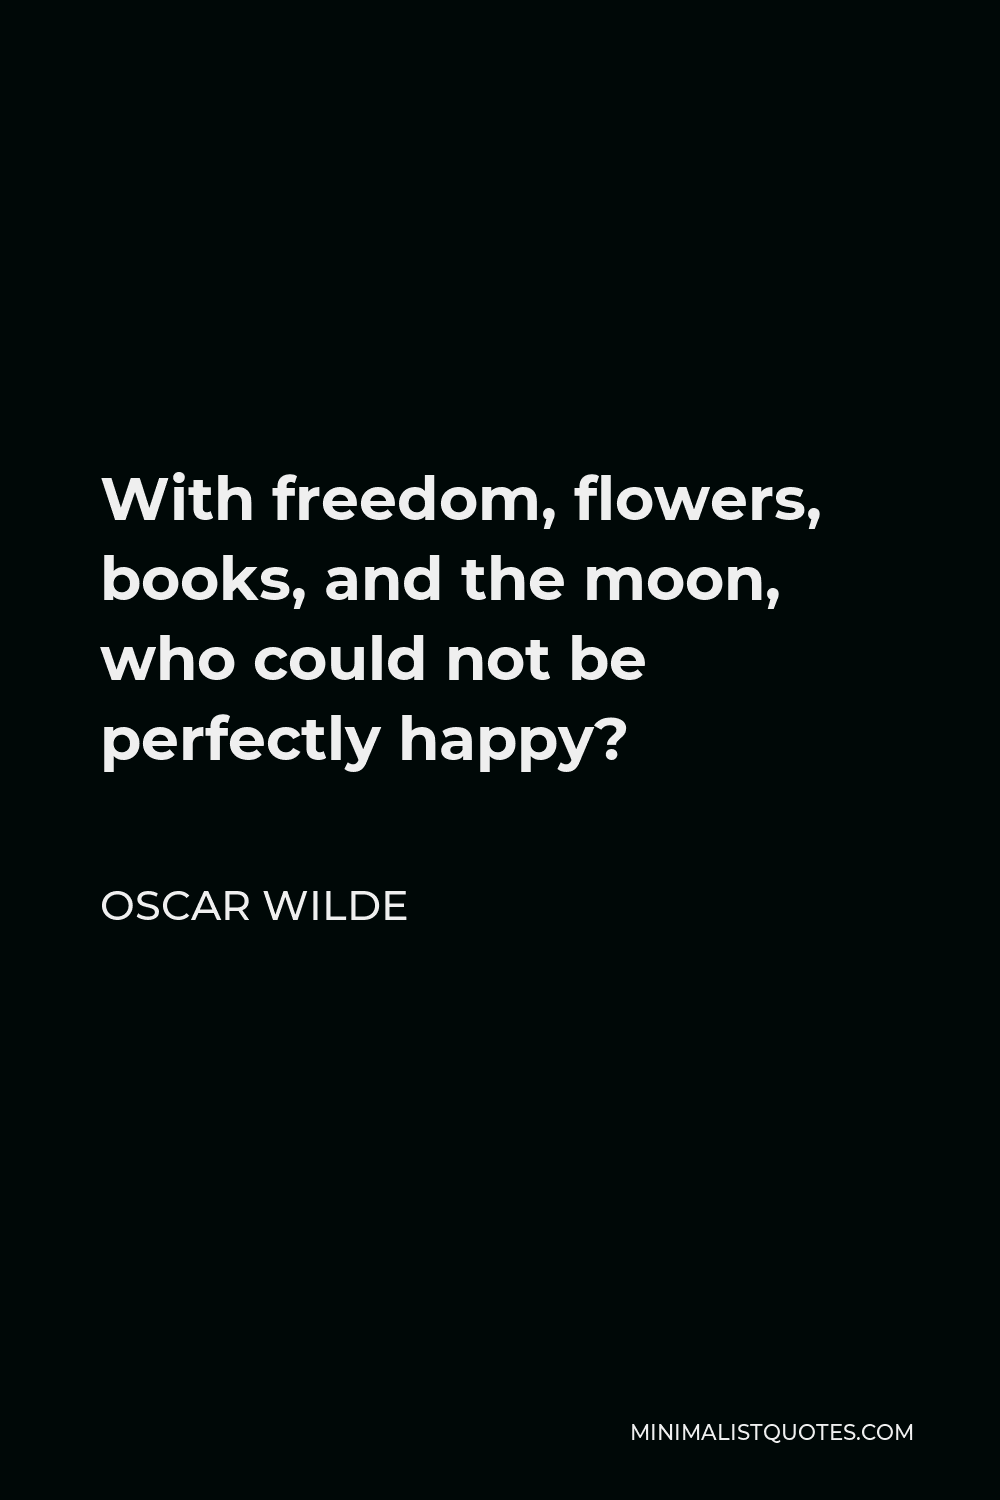 Oscar Wilde Quote: With freedom, flowers, books, and the moon, who ...